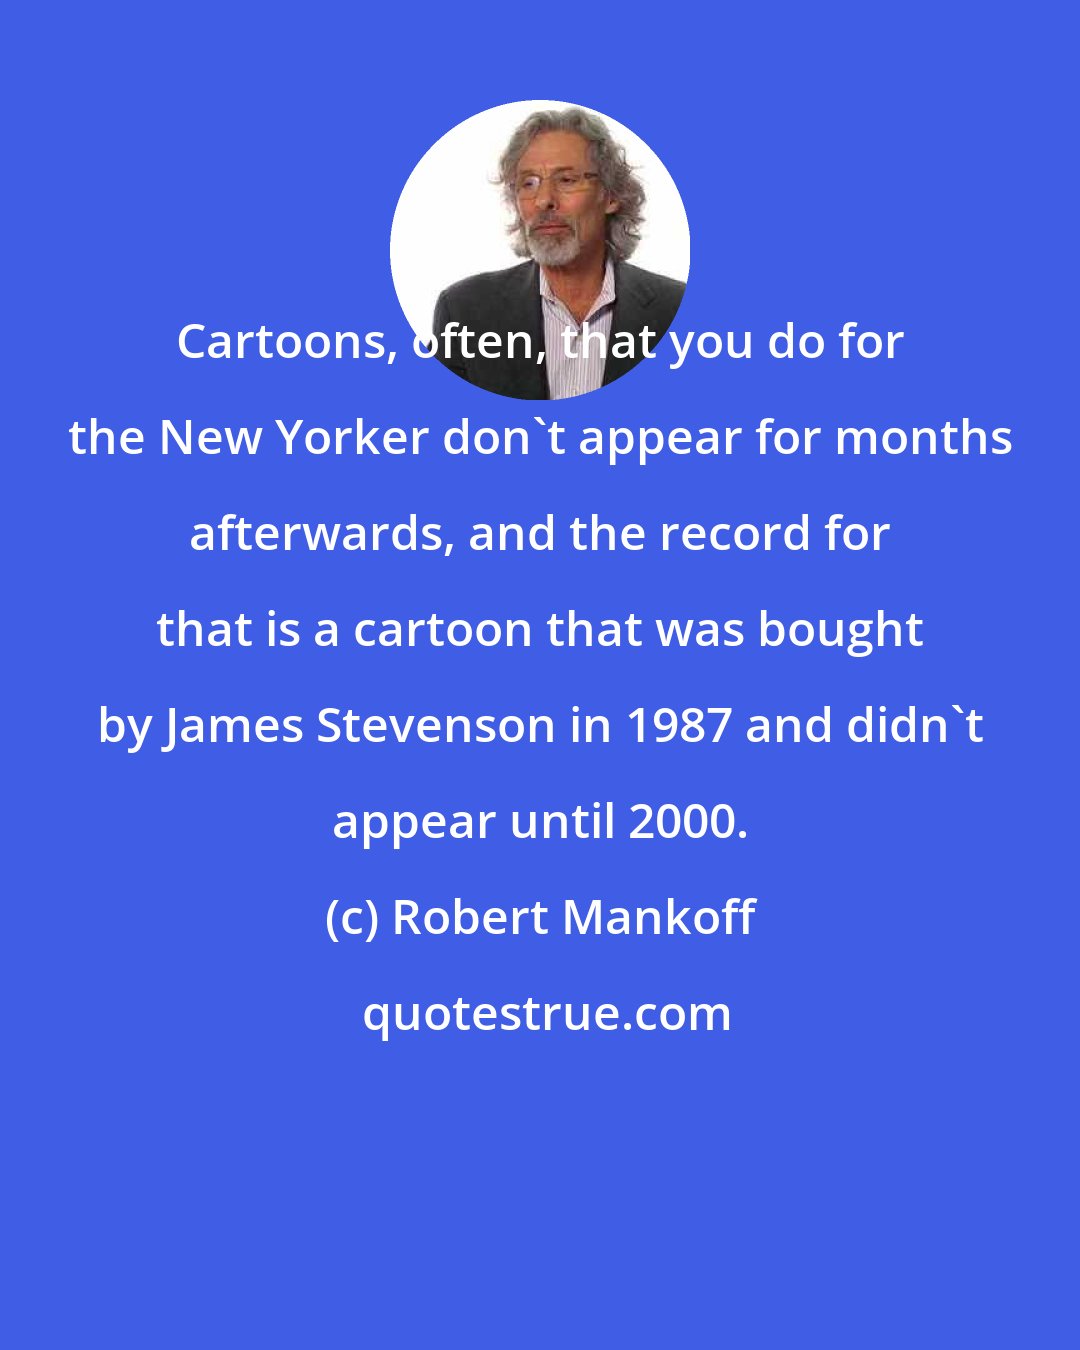 Robert Mankoff: Cartoons, often, that you do for the New Yorker don't appear for months afterwards, and the record for that is a cartoon that was bought by James Stevenson in 1987 and didn't appear until 2000.